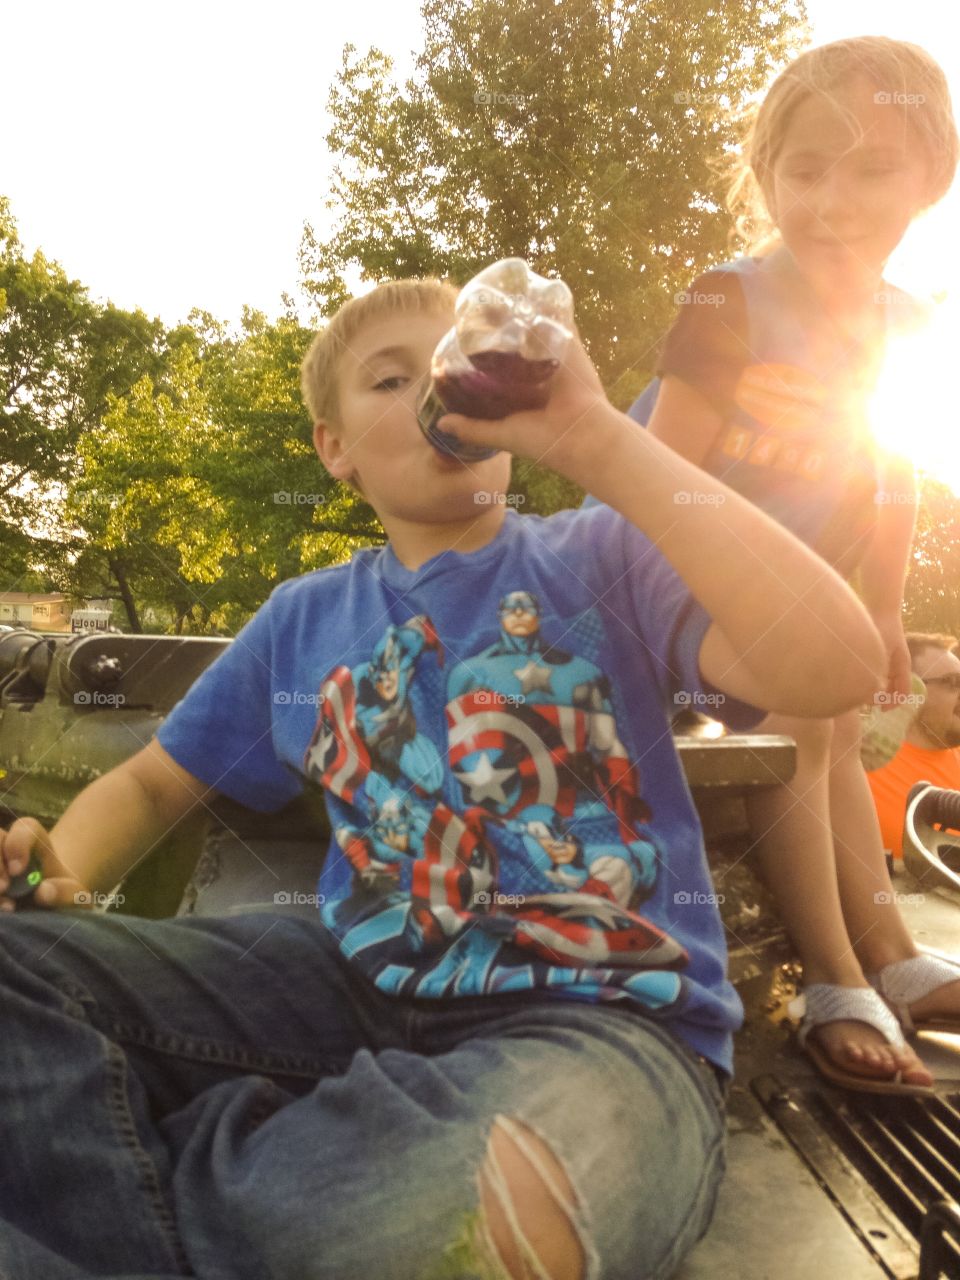 My son and a little friend drinking a soda in the sun.